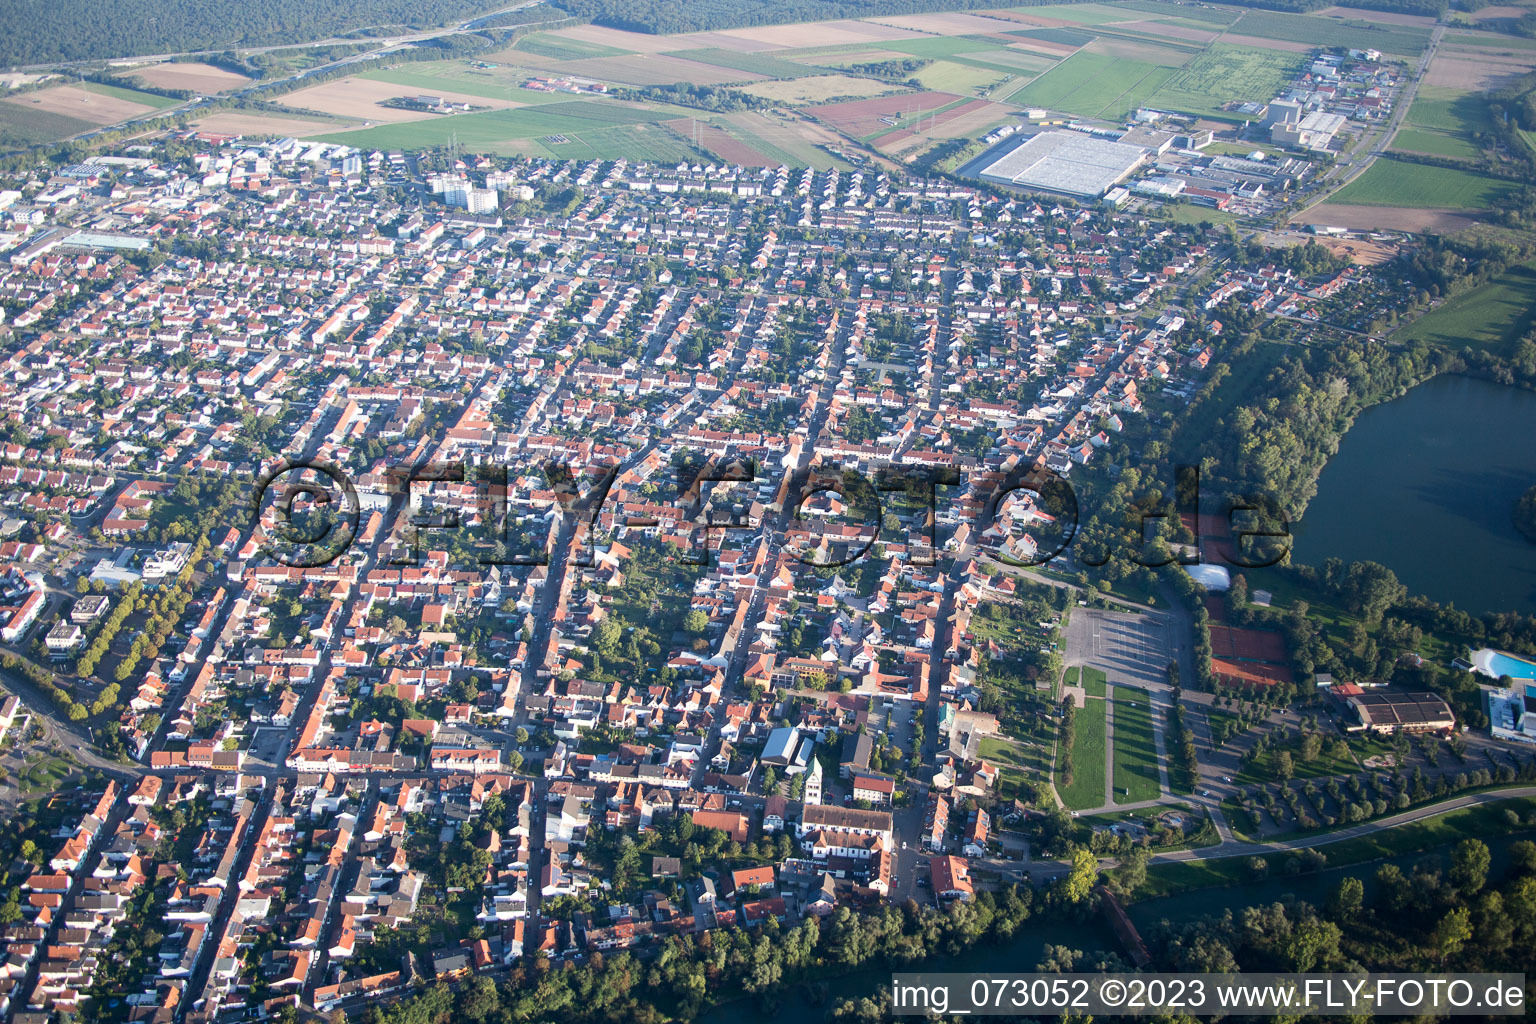 Drone image of Ketsch in the state Baden-Wuerttemberg, Germany